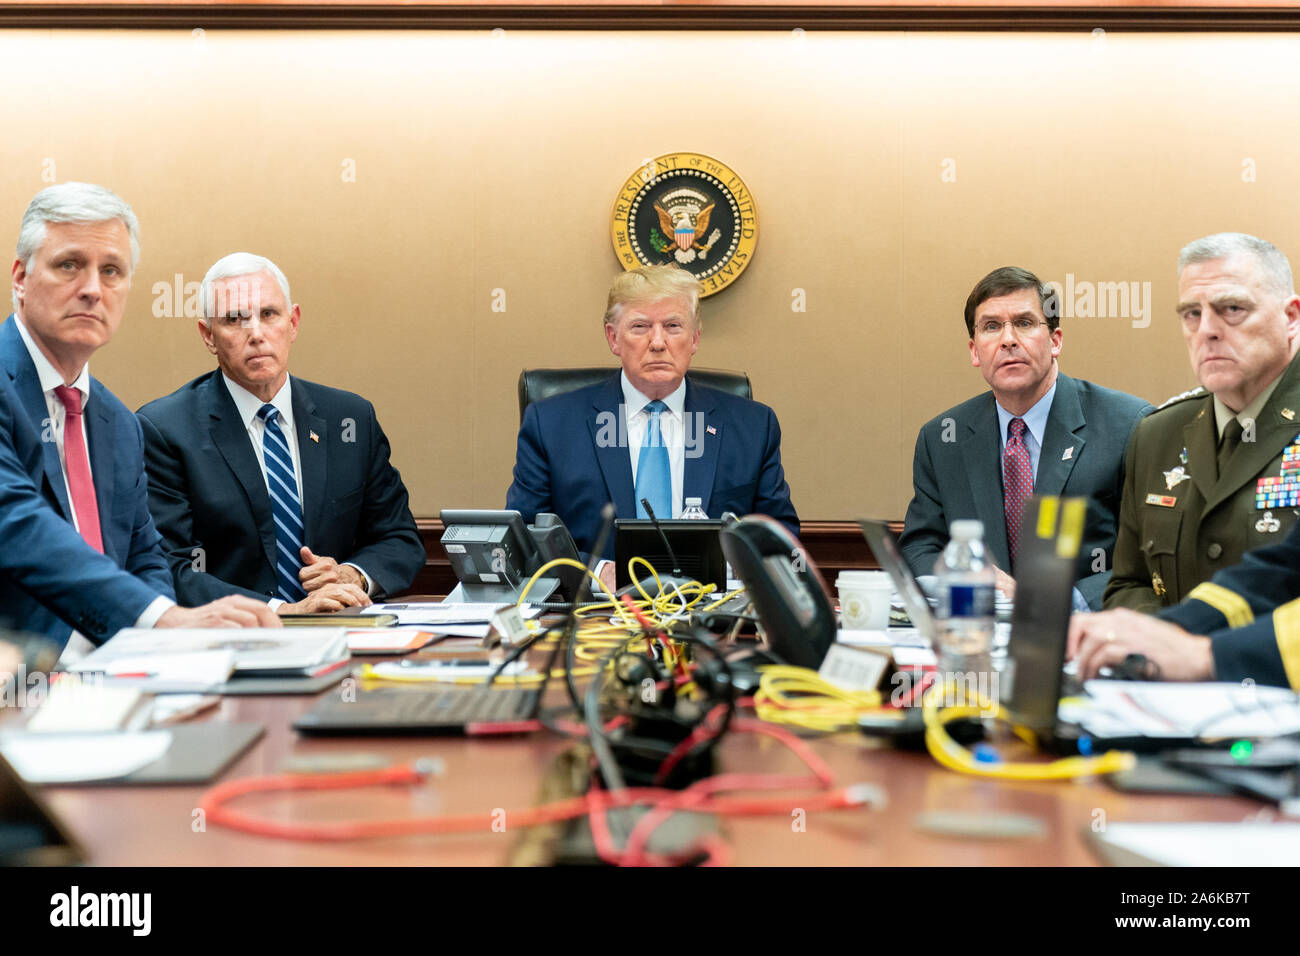 Washington DC, USA. 26th Oct, 2019. In this photo released by the White House, United States President Donald J. Trump is joined by United States Vice President Mike Pence, United States National Security Advisor Robert C. O'Brien, left; United States Secretary of Defense Dr. Mark T. Esper and United States Army General Mark A. Milley, Chairman of the Joint Chiefs of Staff, right, Saturday, October 26, 2019, in the Situation Room of the White House in Washington, DC monitoring developments as U.S. Special Operations forces close in on ISIS leader Abu Bakr al-Baghdadi's compound in Syria with a Stock Photo